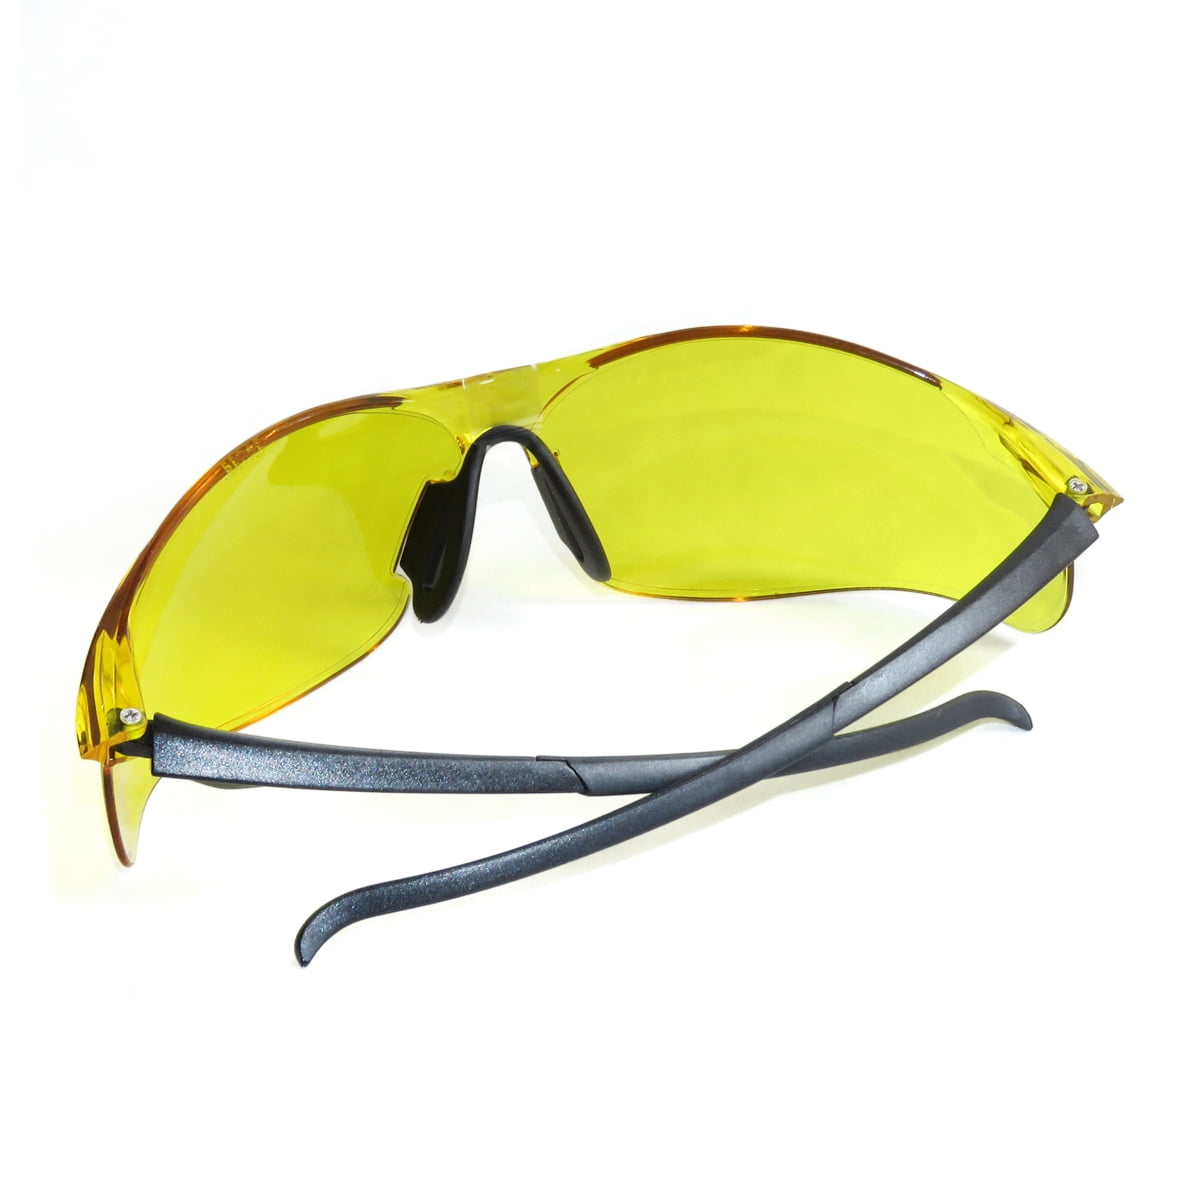 New Silverline SAFETY GLASSES UV PROTECTION Yellow Workwear Impact Eye Goggles ✔ 